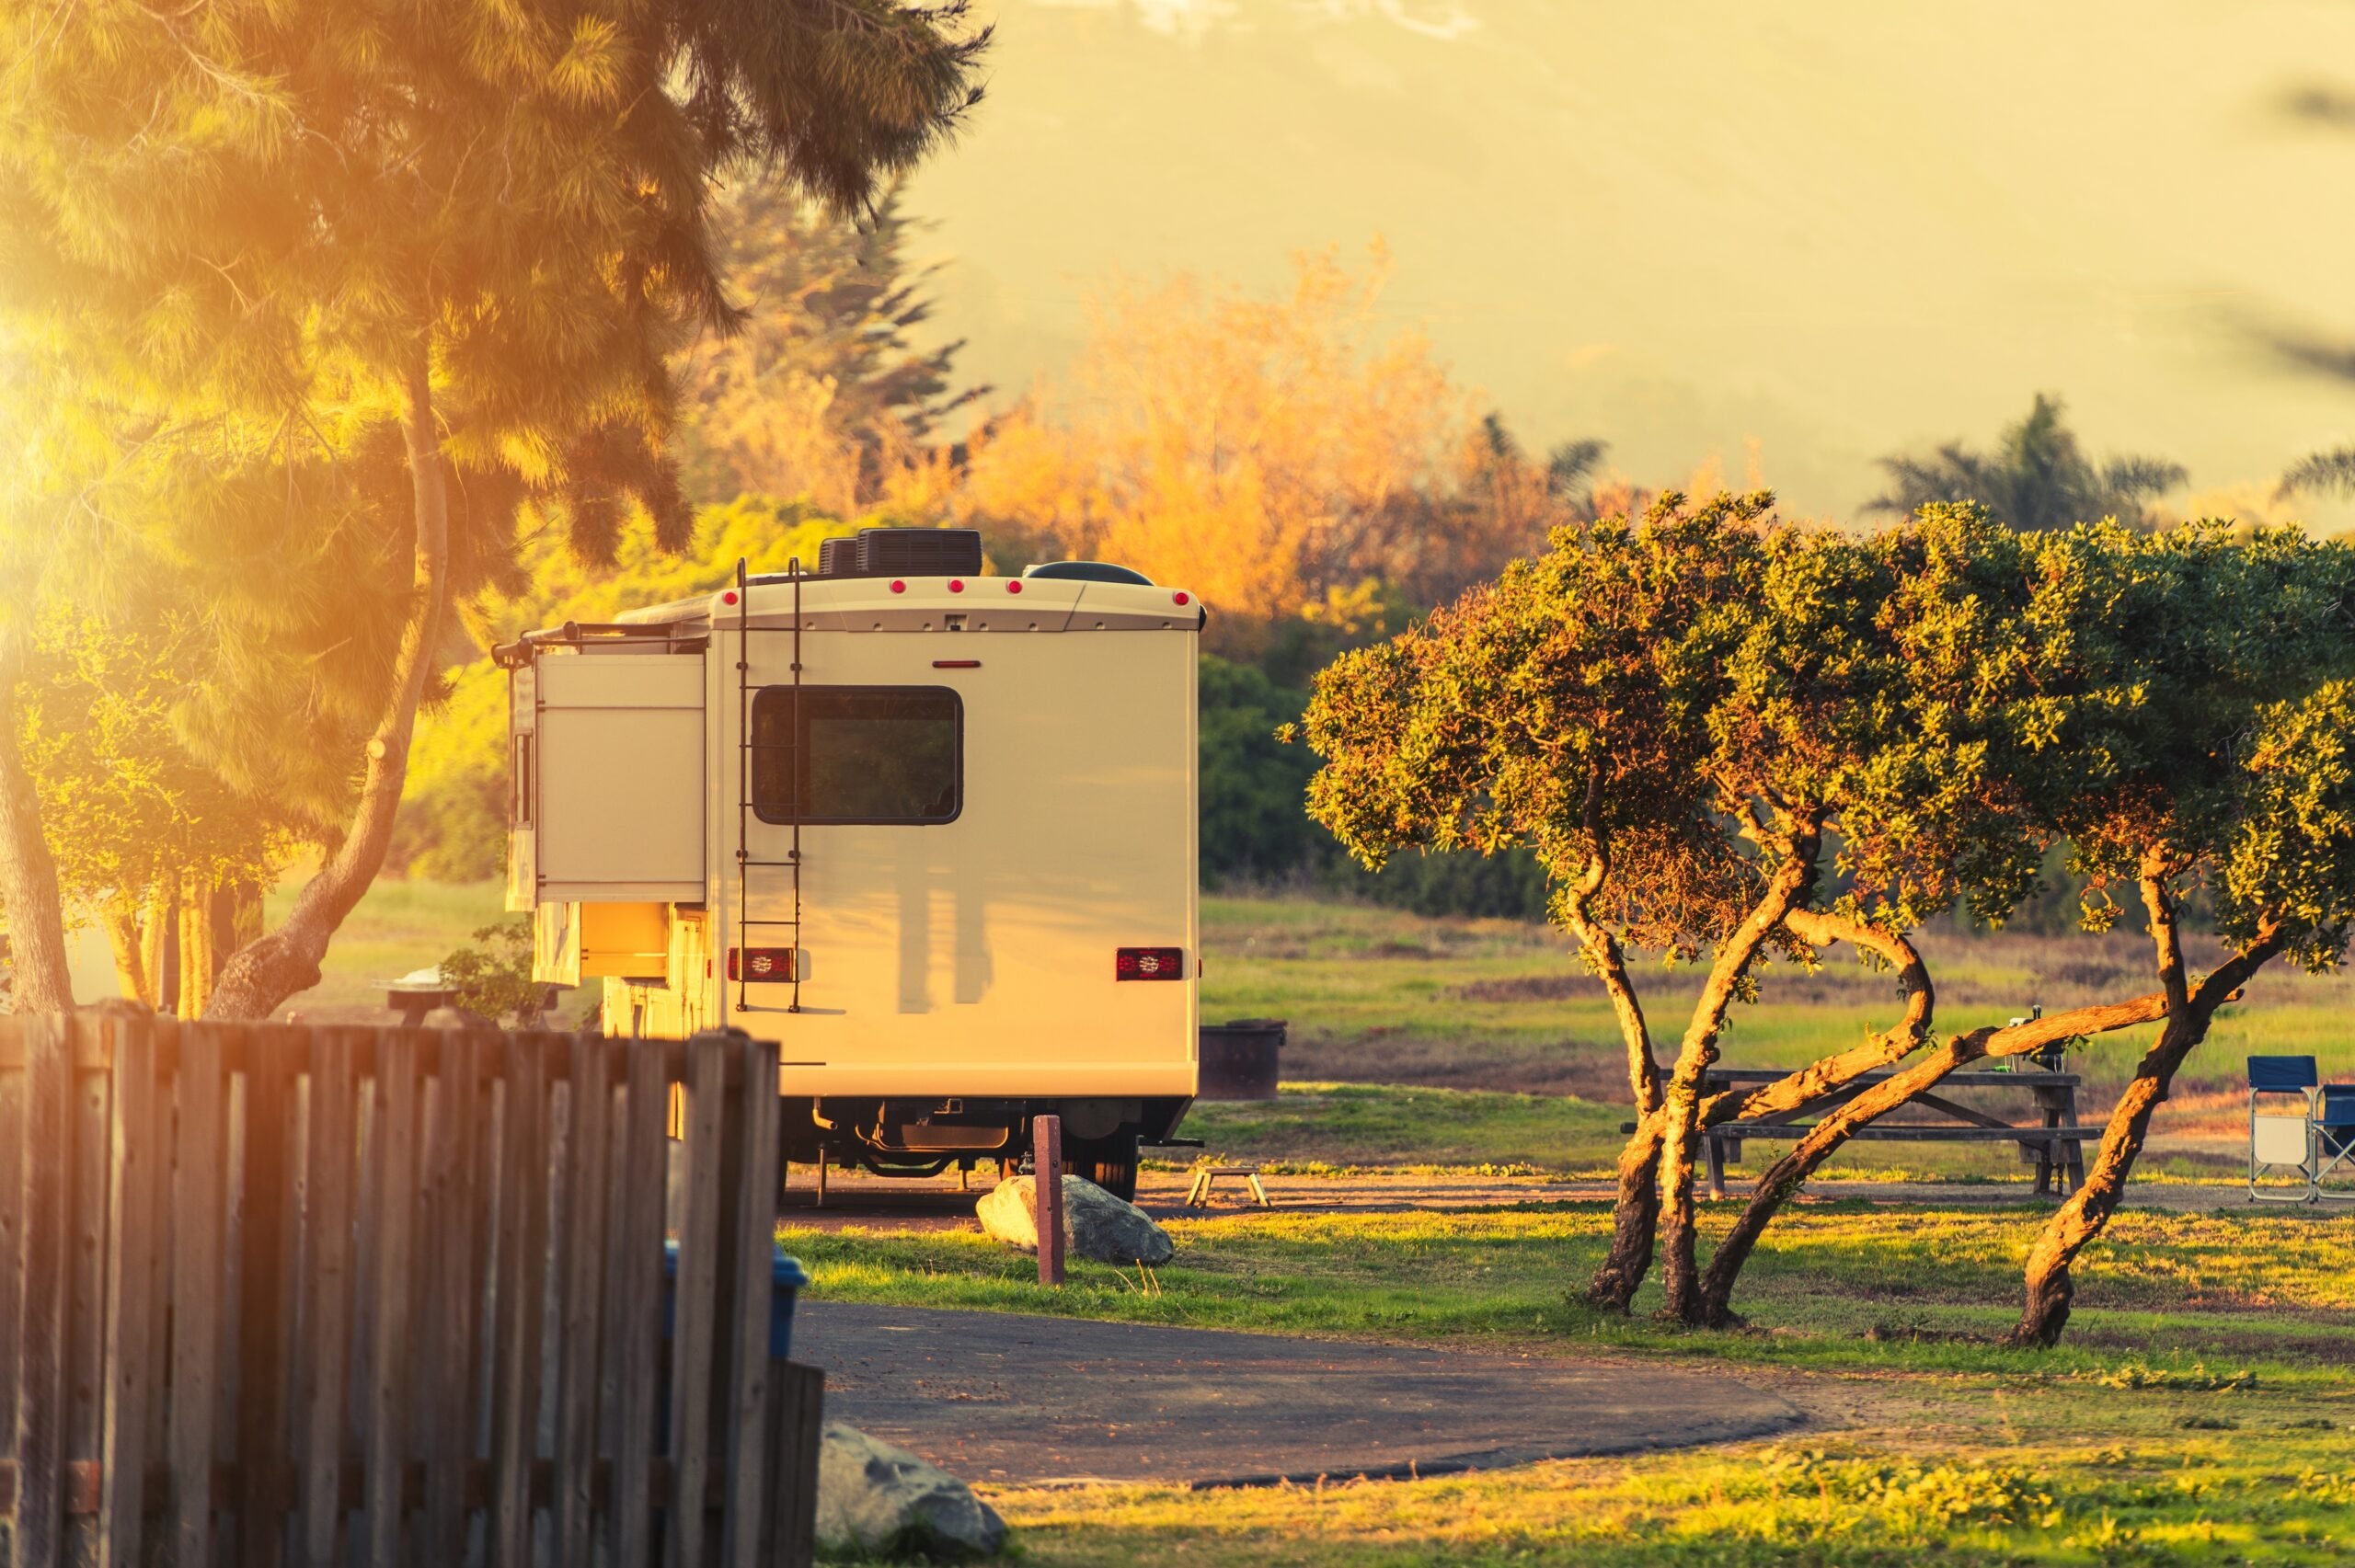 Where Can I Park An RV Full-Time?